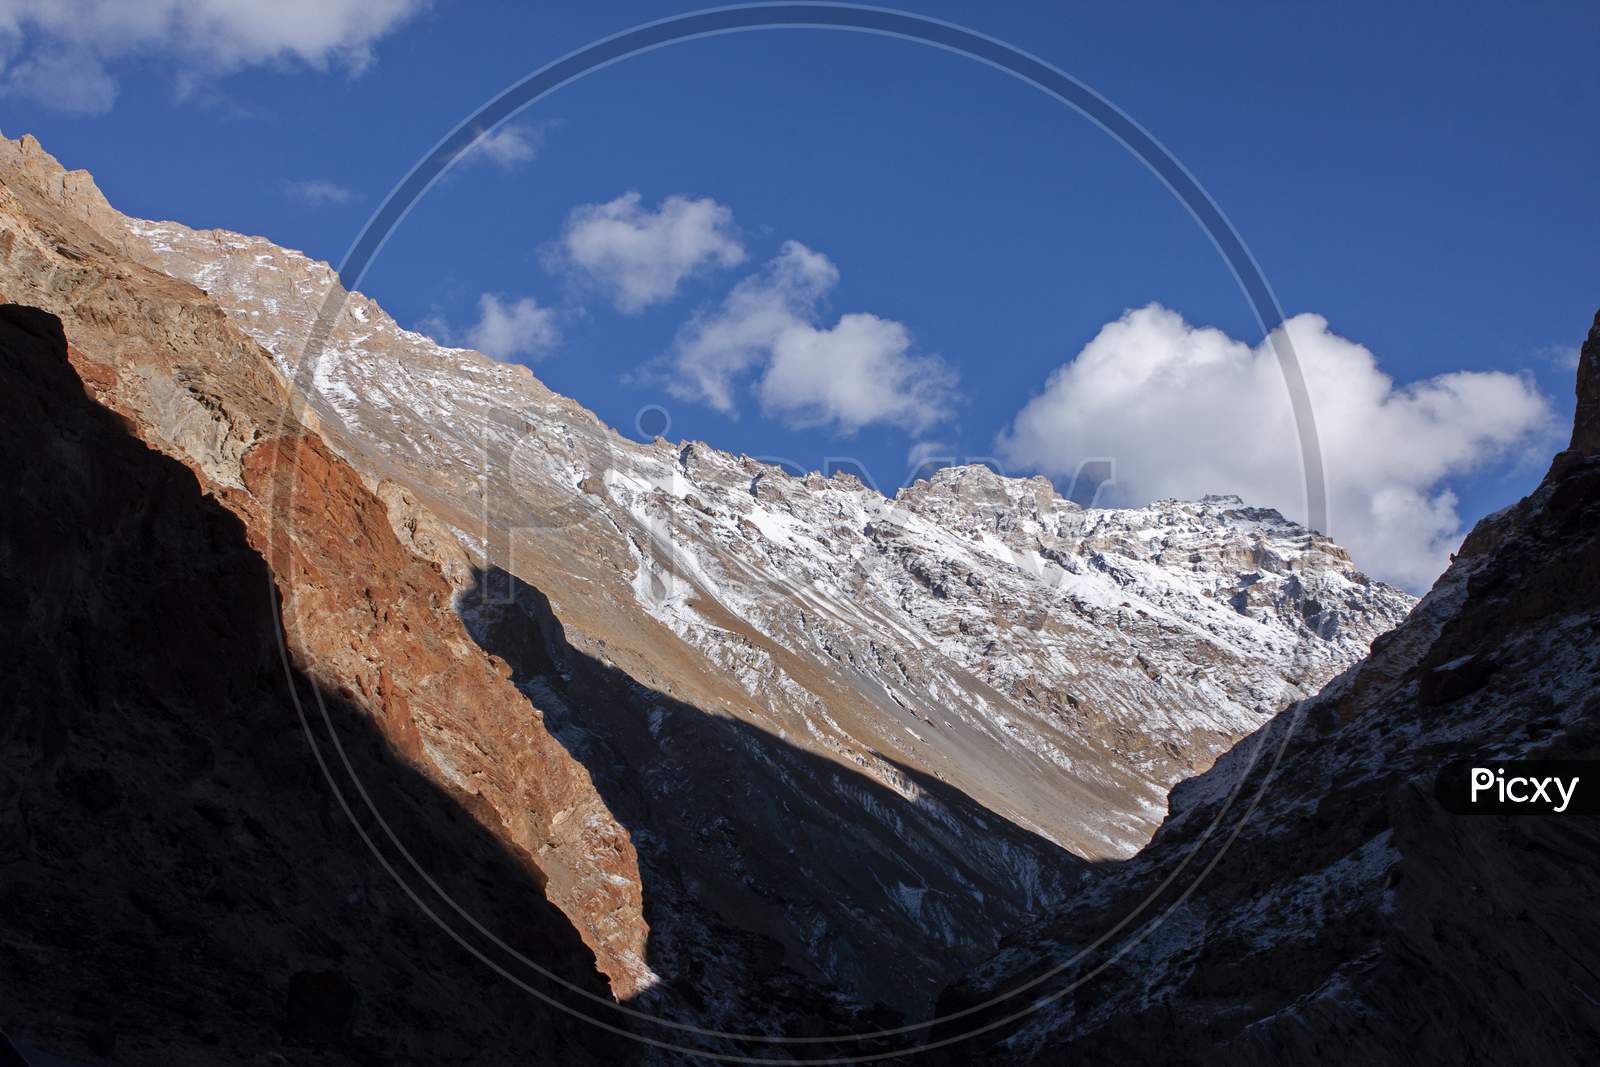 High Altitude Peaks And Its Shadow In A Cold Sunny Day In The Himalaya In Ladakh